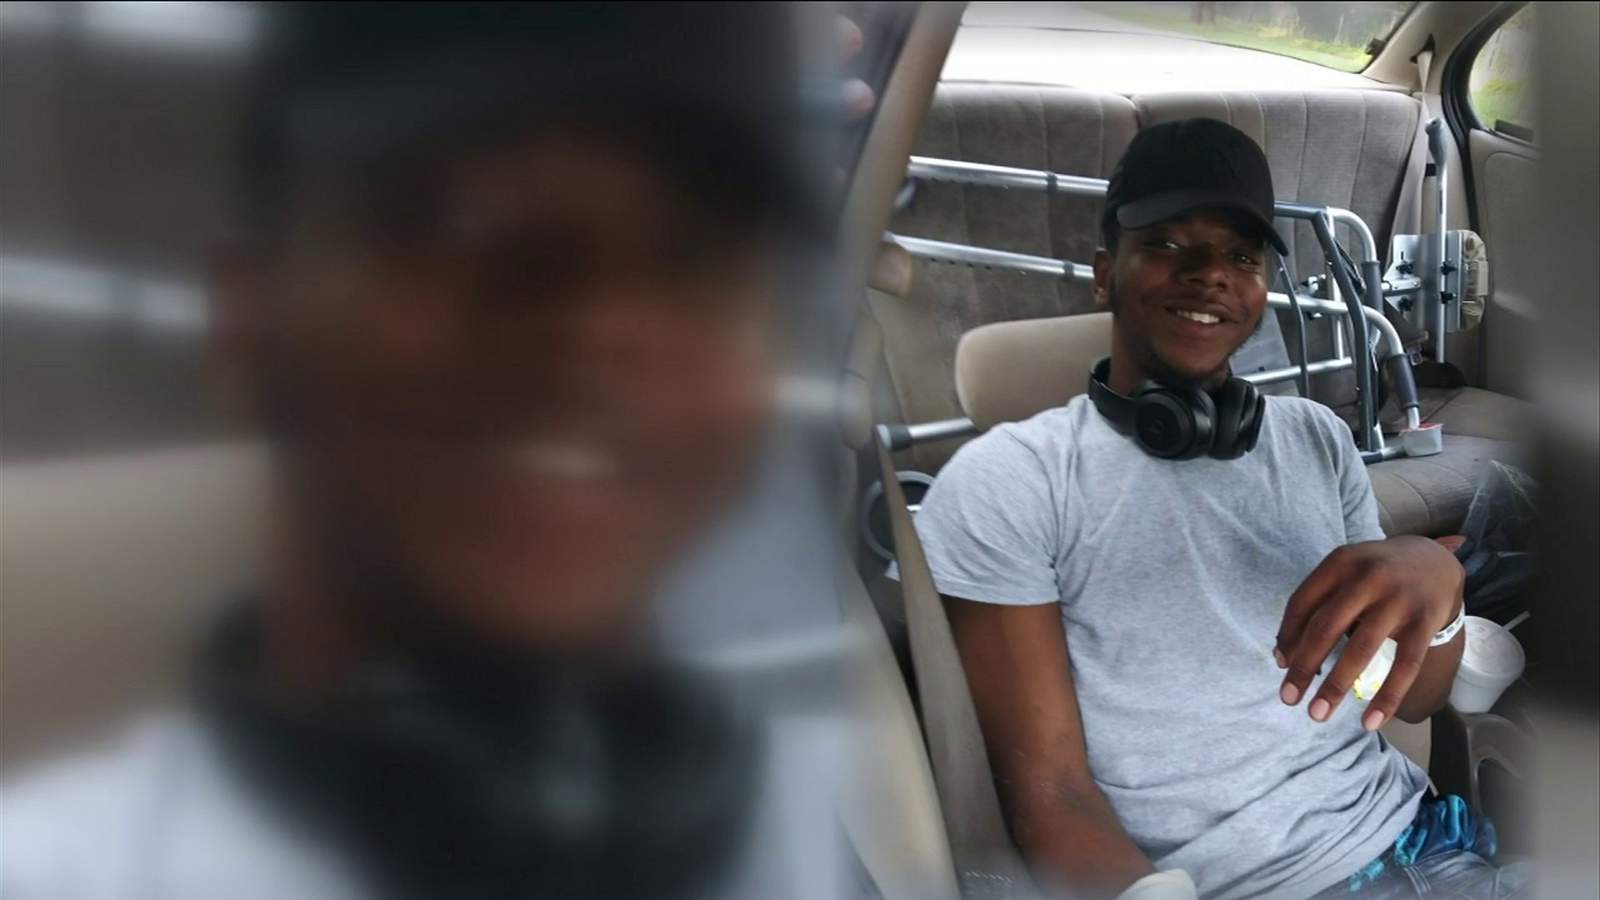 Jacksonville family speaks out after 19-year-old killed by police outside Chicago